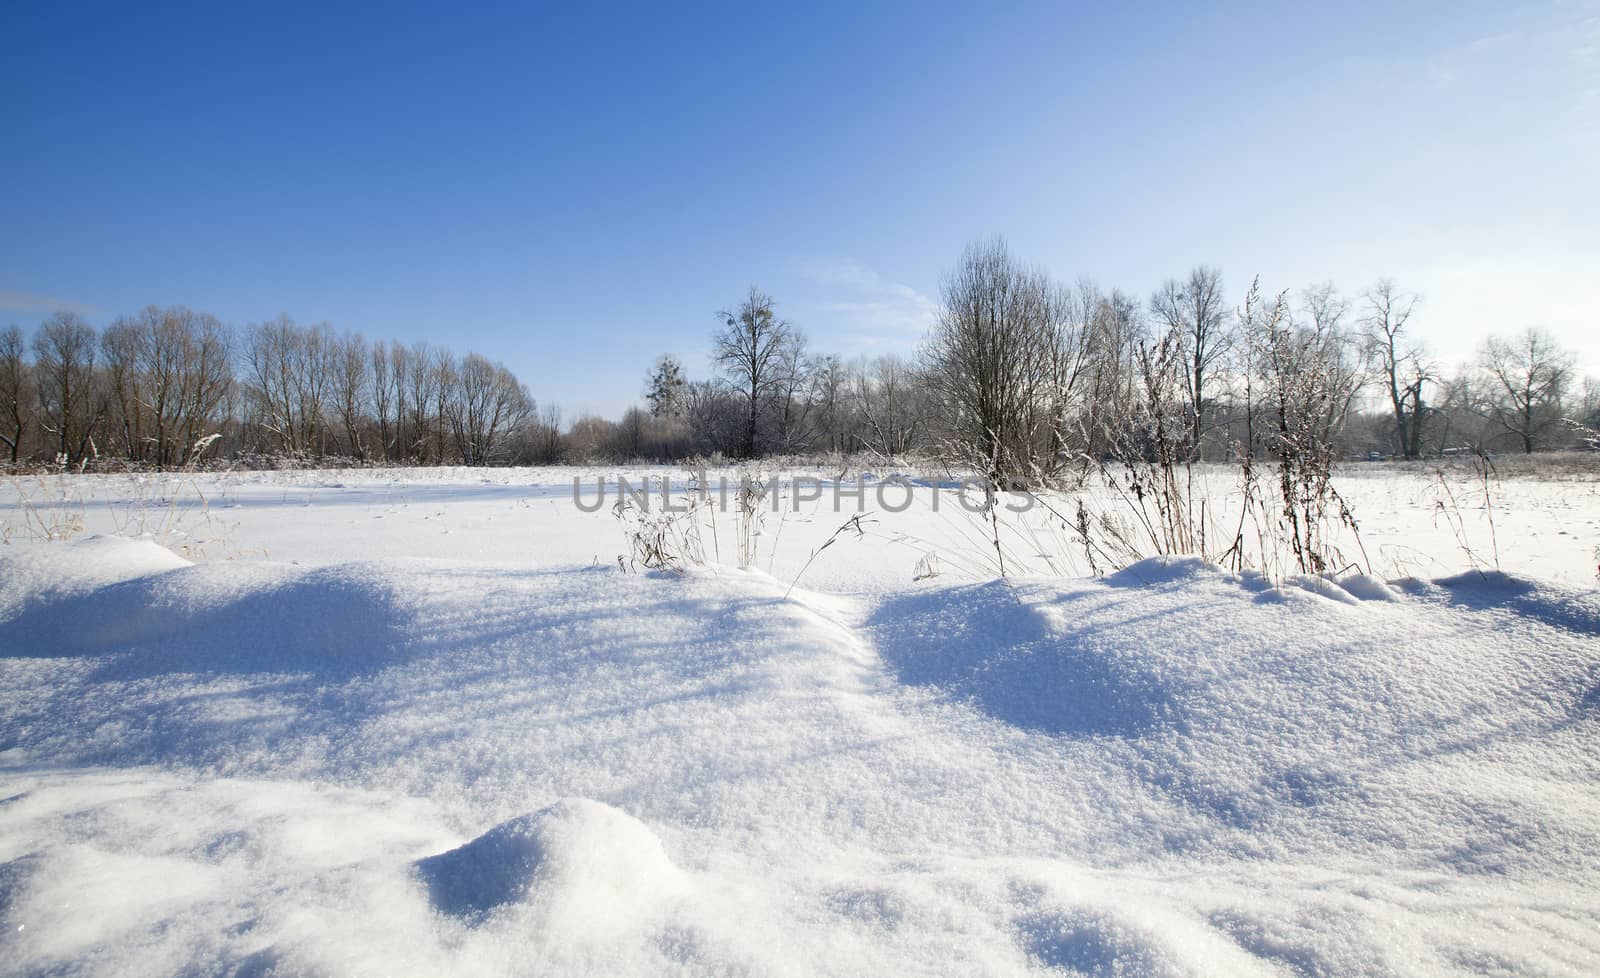 snow-covered field  by avq